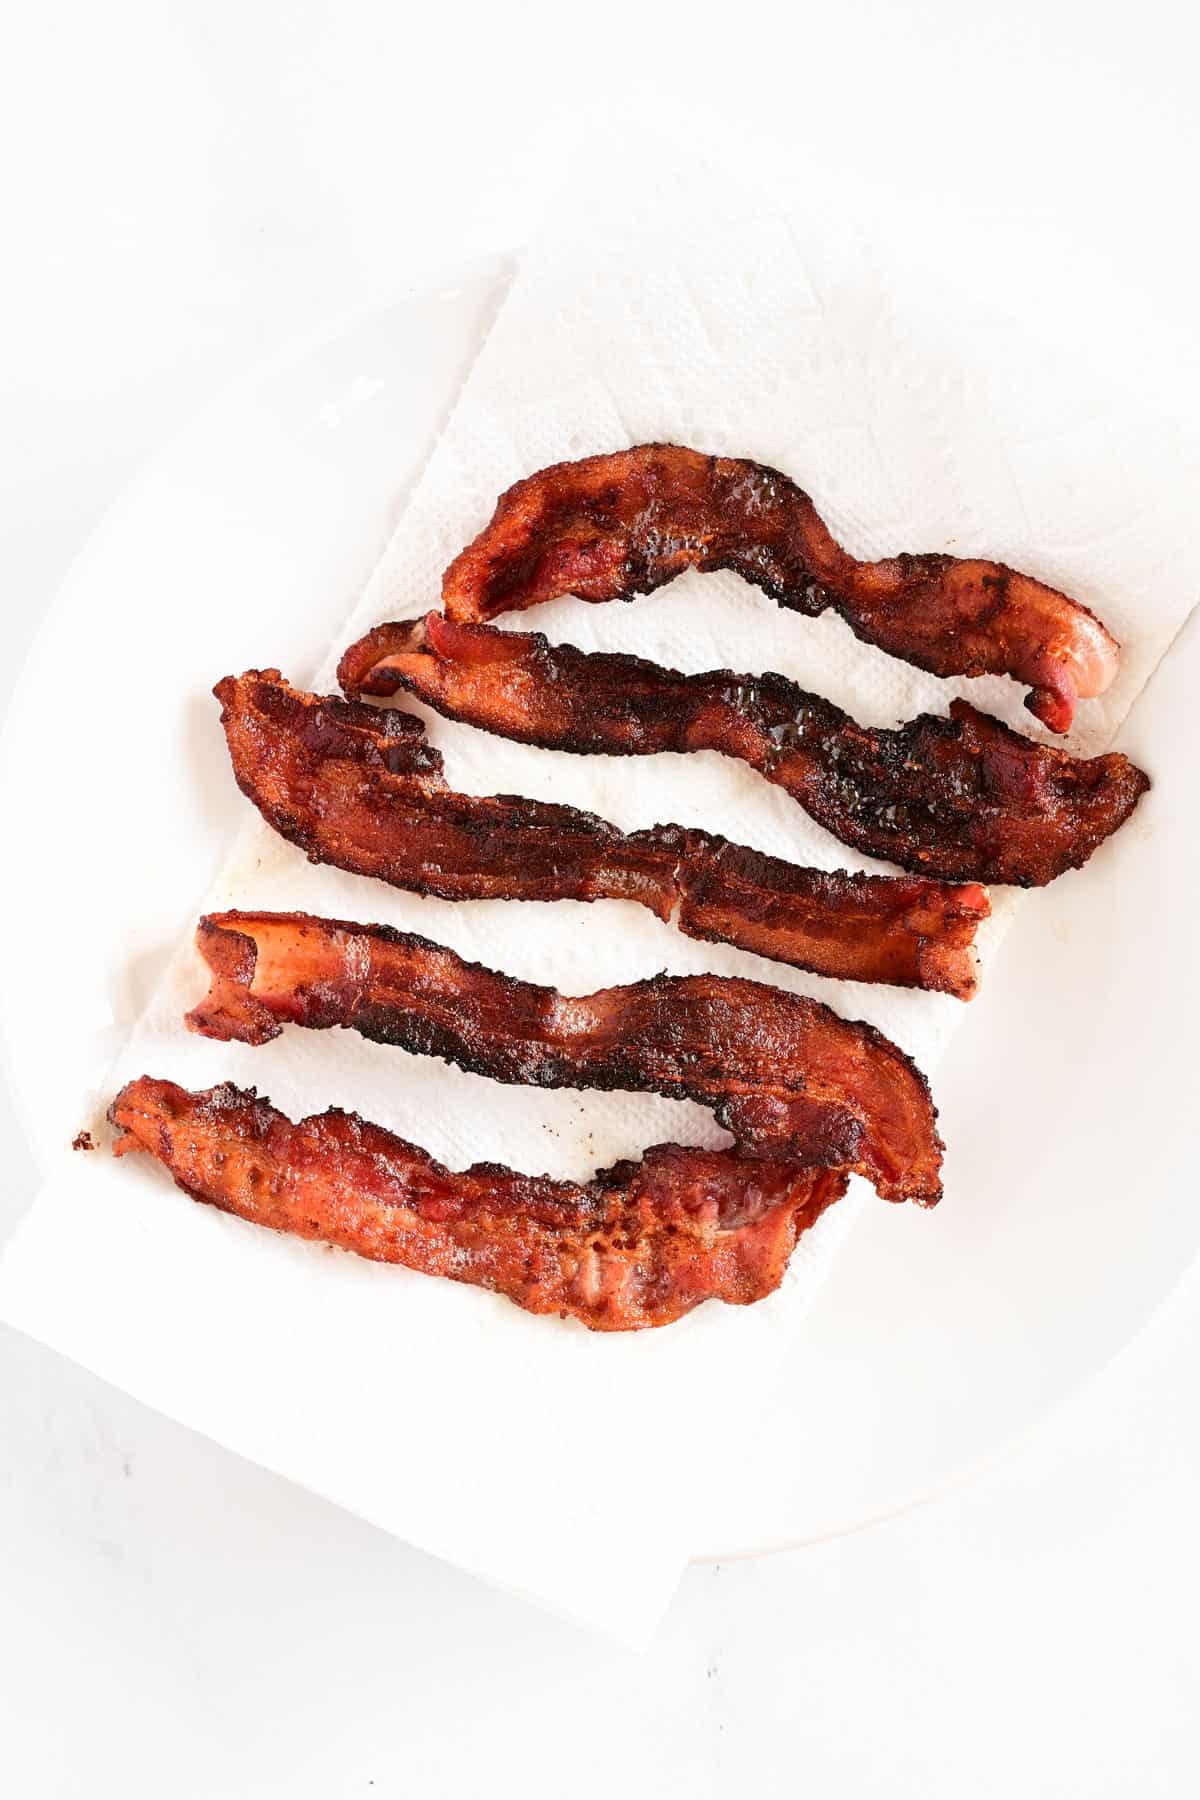 Five strips of cooked bacon.